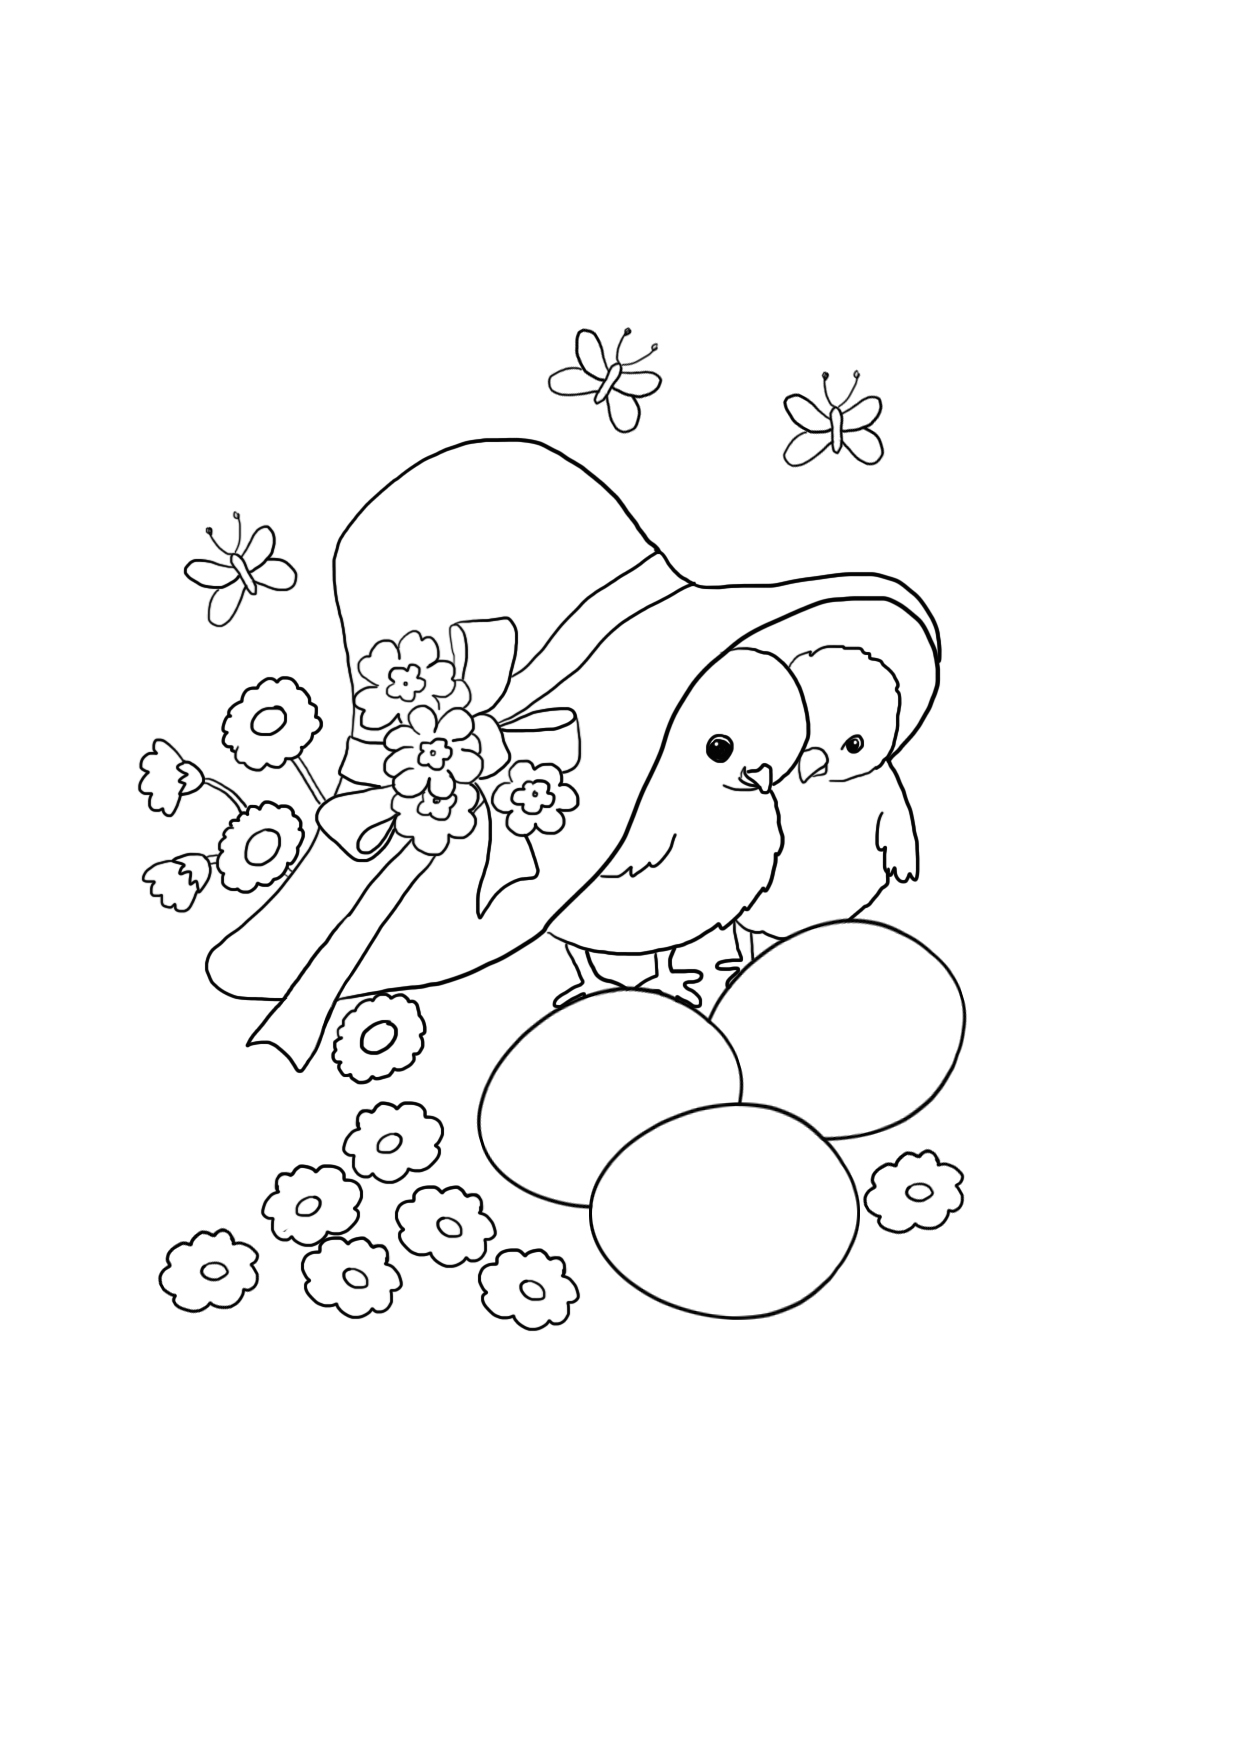 Easter coloring sheet with chickens and flowers